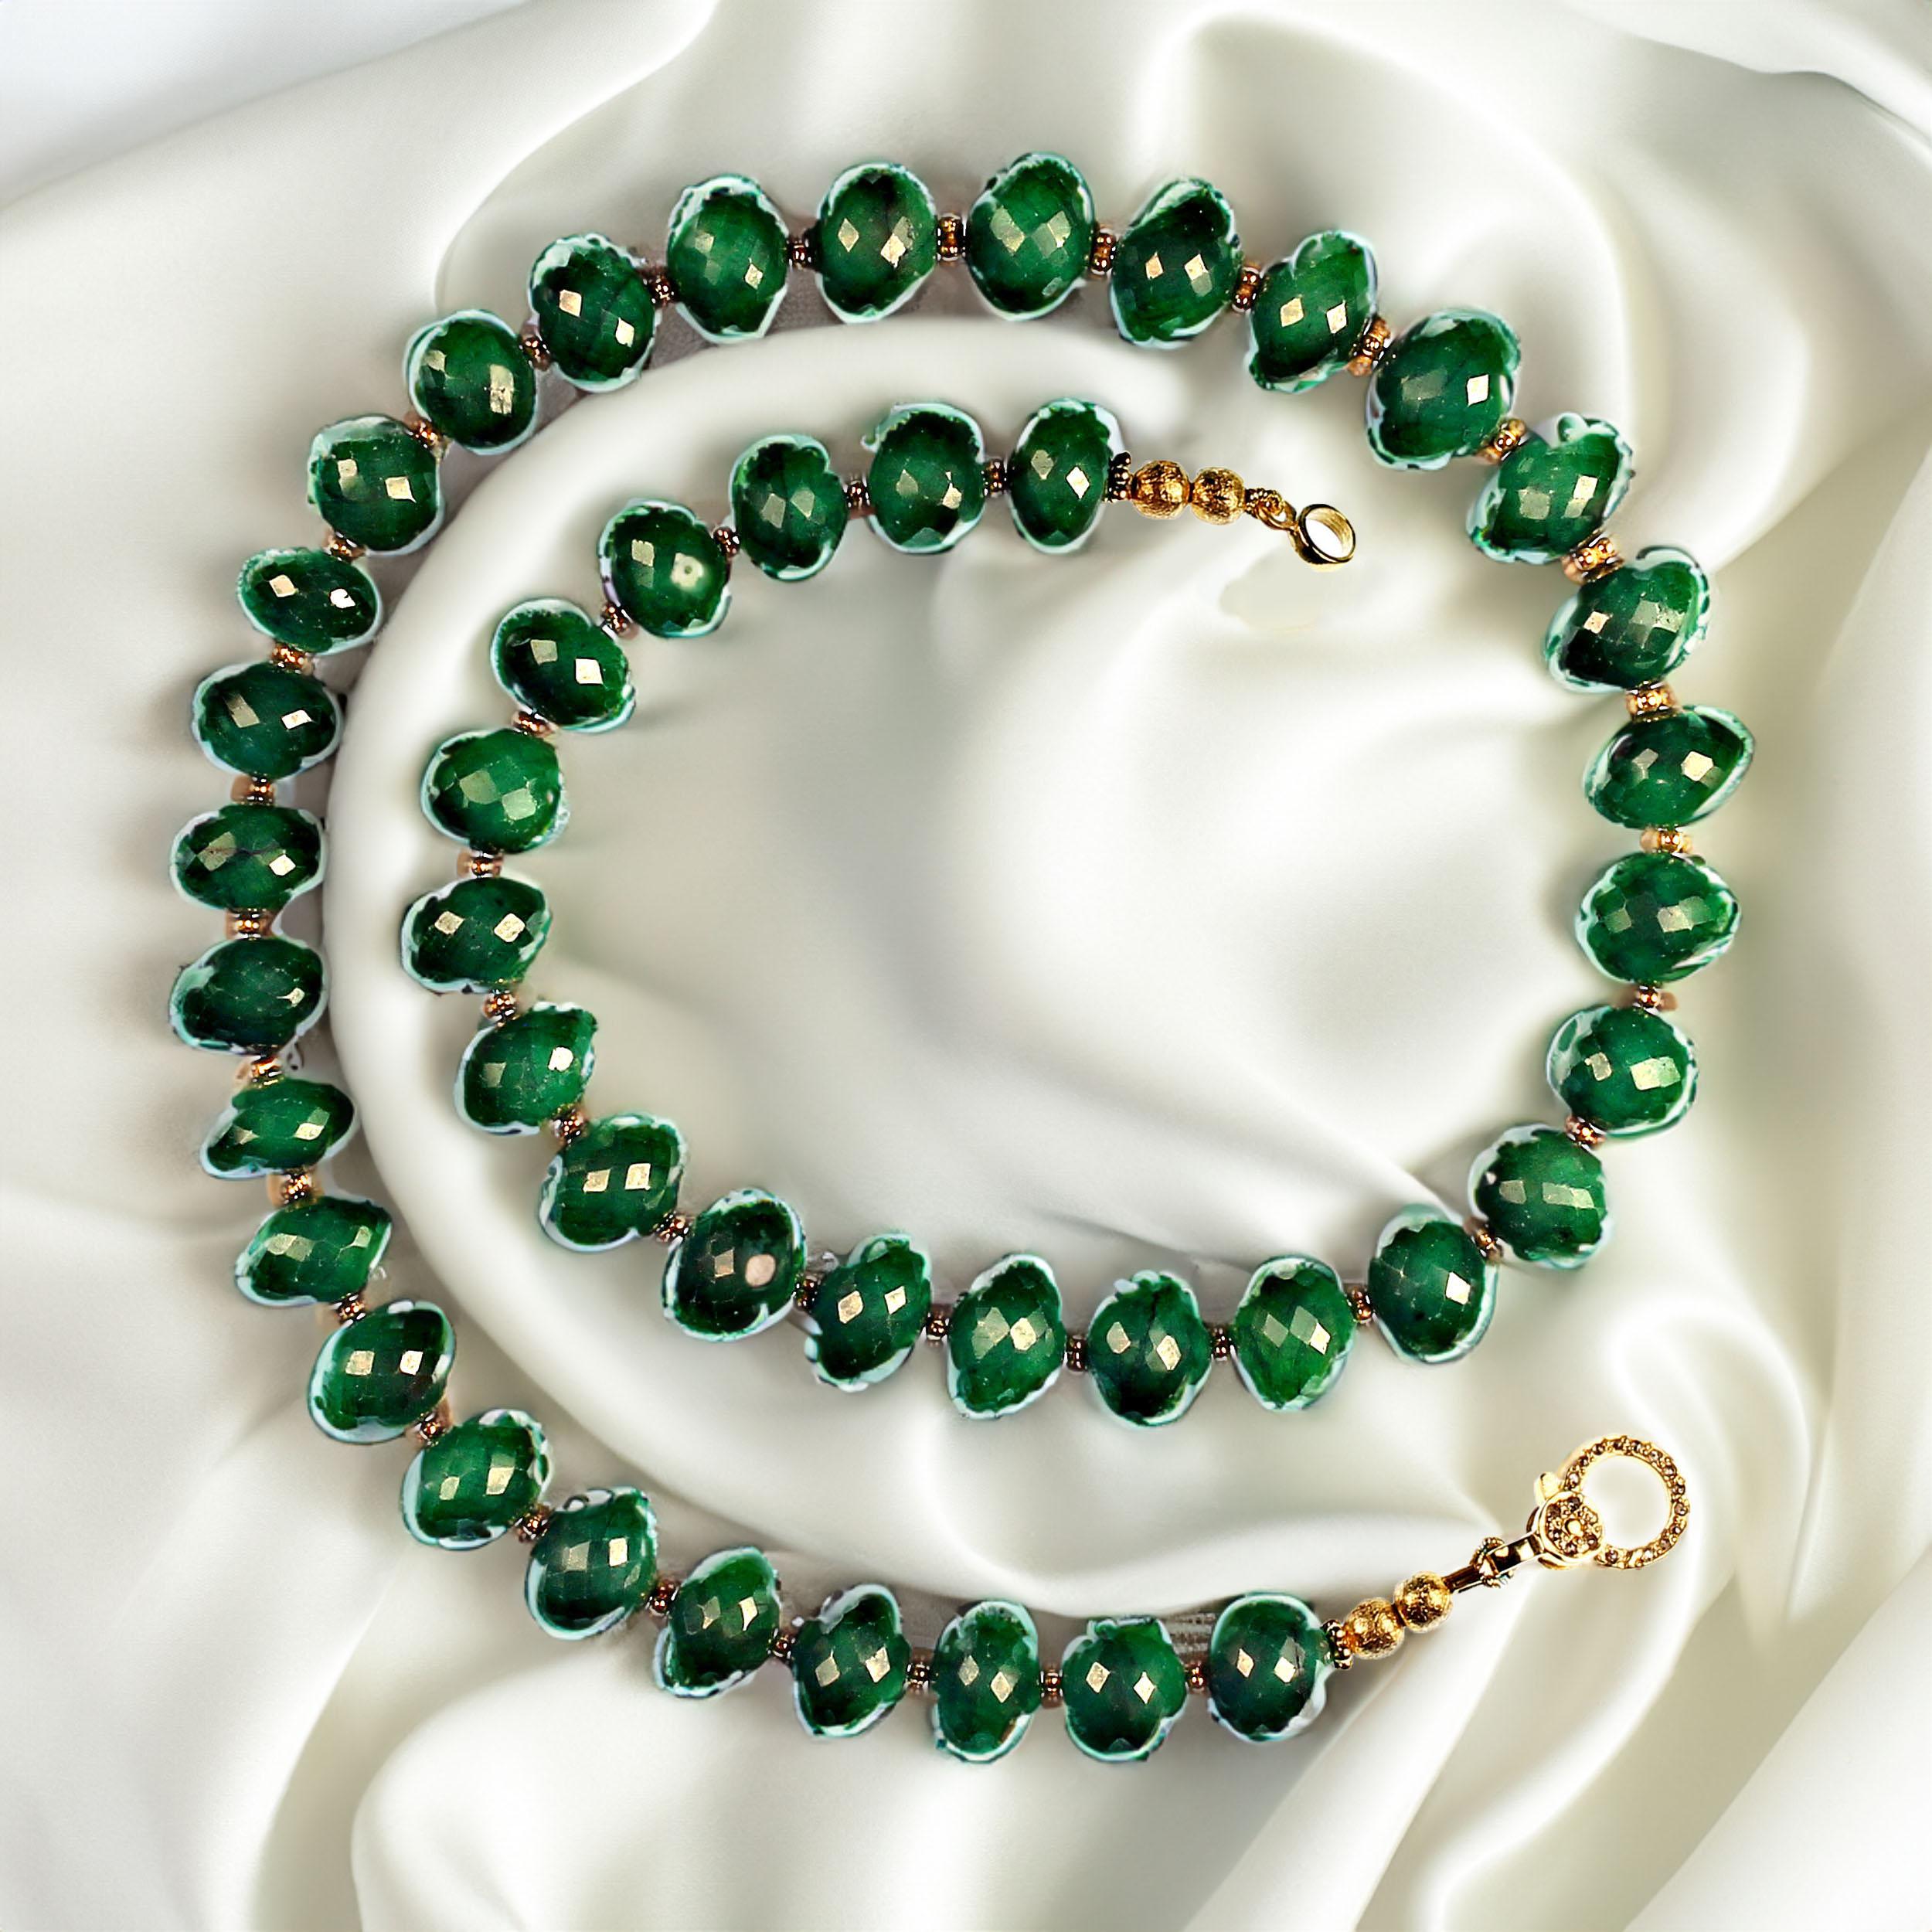 18 Inch slightly oval, not quite round faceted emerald necklace. There are tiny goldy daisies accenting the glitter of the emerald facets. All you emerald lovers are in luck with this beauty, it will be your 'go to' necklace from now on.  It's the